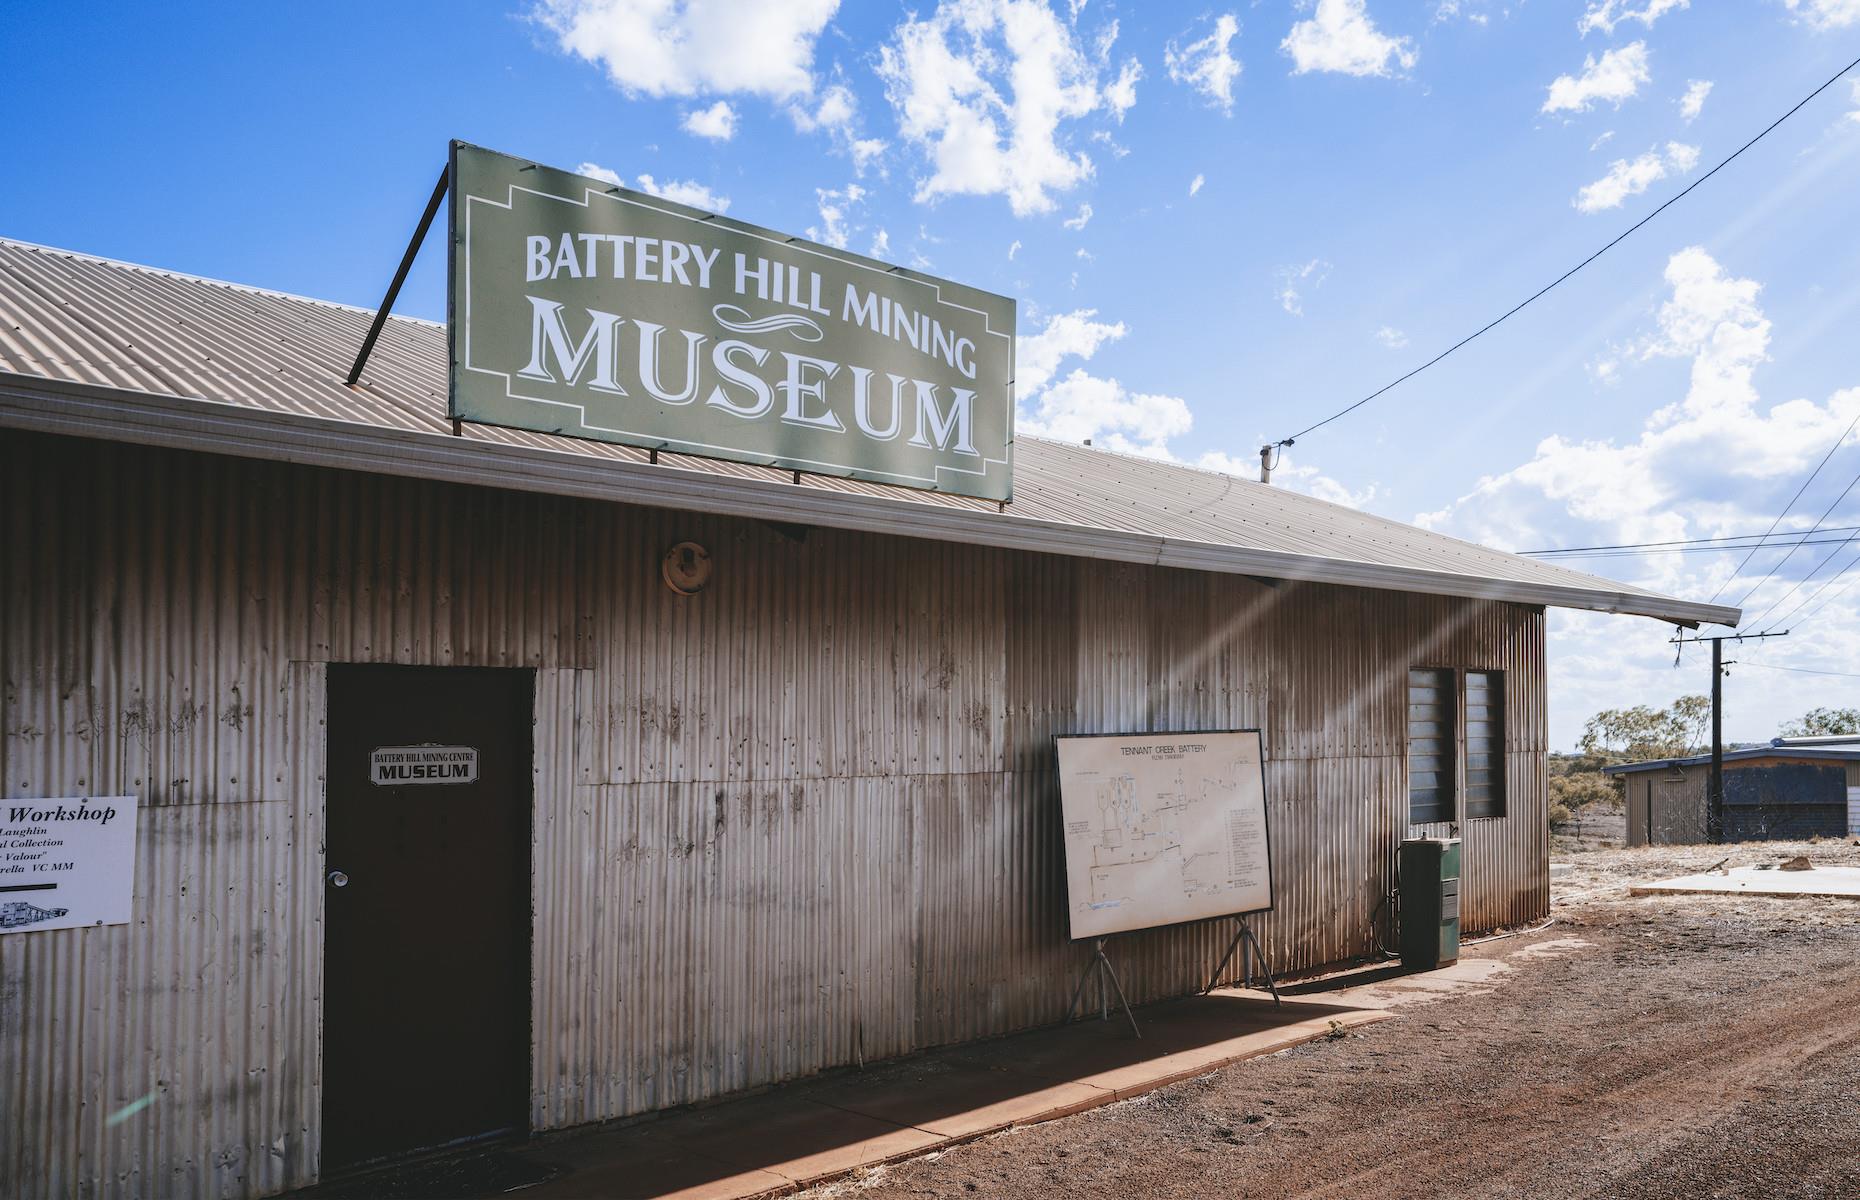 <p>Get a glimpse of what life was like in the mid-20th century at the remains of the historic No 3 Government Gold Stamp Battery near Tennant Creek, where the territory’s outback gold rush (and Australia’s last) started in the late 1930s. <a href="https://northernterritory.com/gb/en/tennant-creek-and-barkly-region/see-and-do/battery-hill-mining-centre">The Battery Hill Mining Centre</a> is open for self-guided tours around the now abandoned machinery and buildings along with underground mine tours.</p>